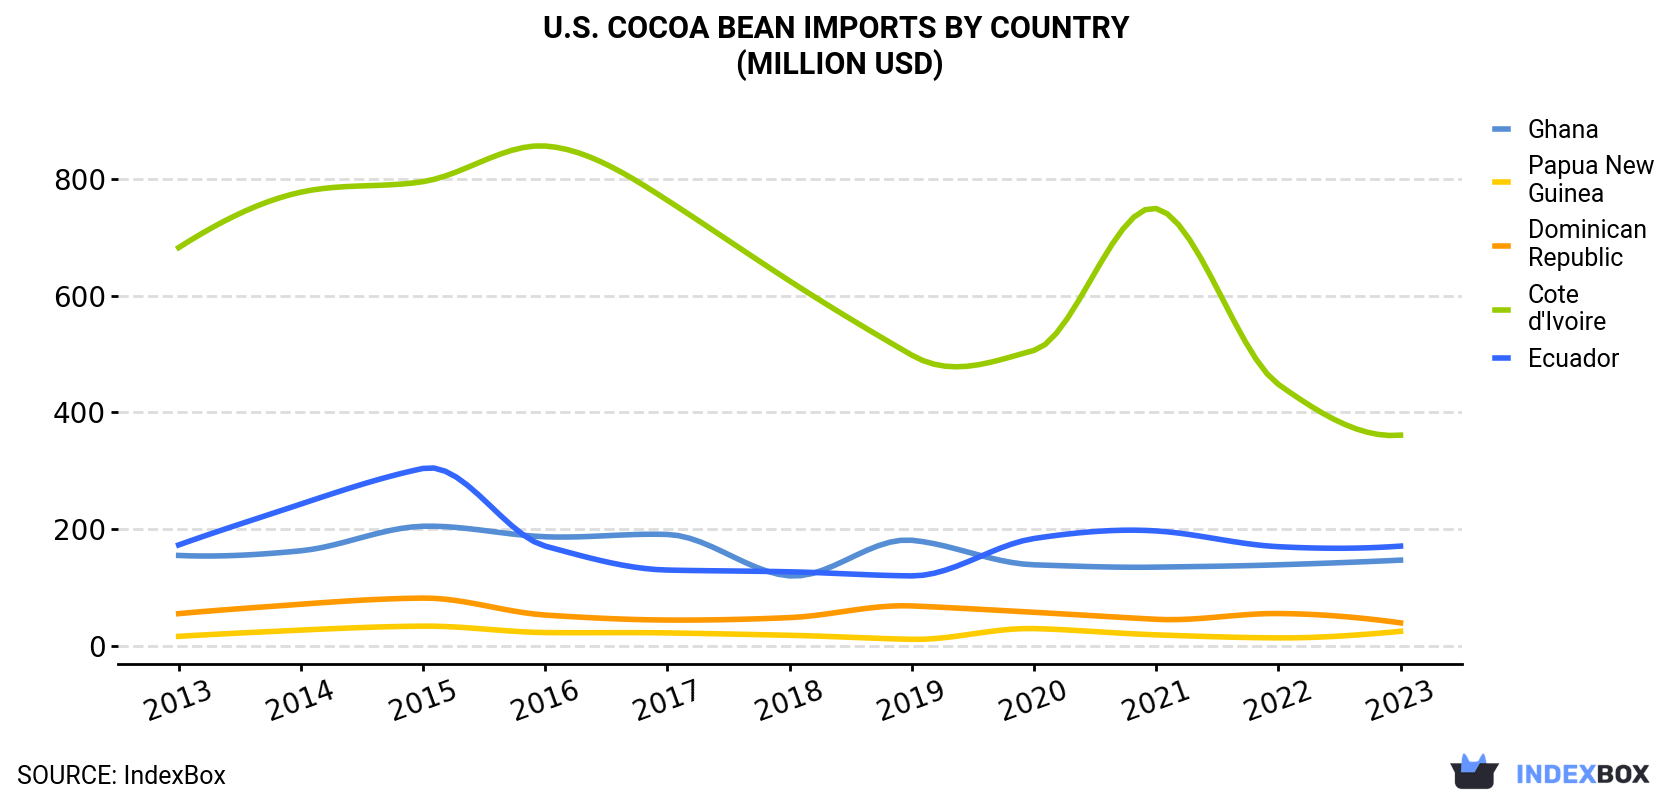 U.S. Cocoa Bean Imports By Country (Million USD)